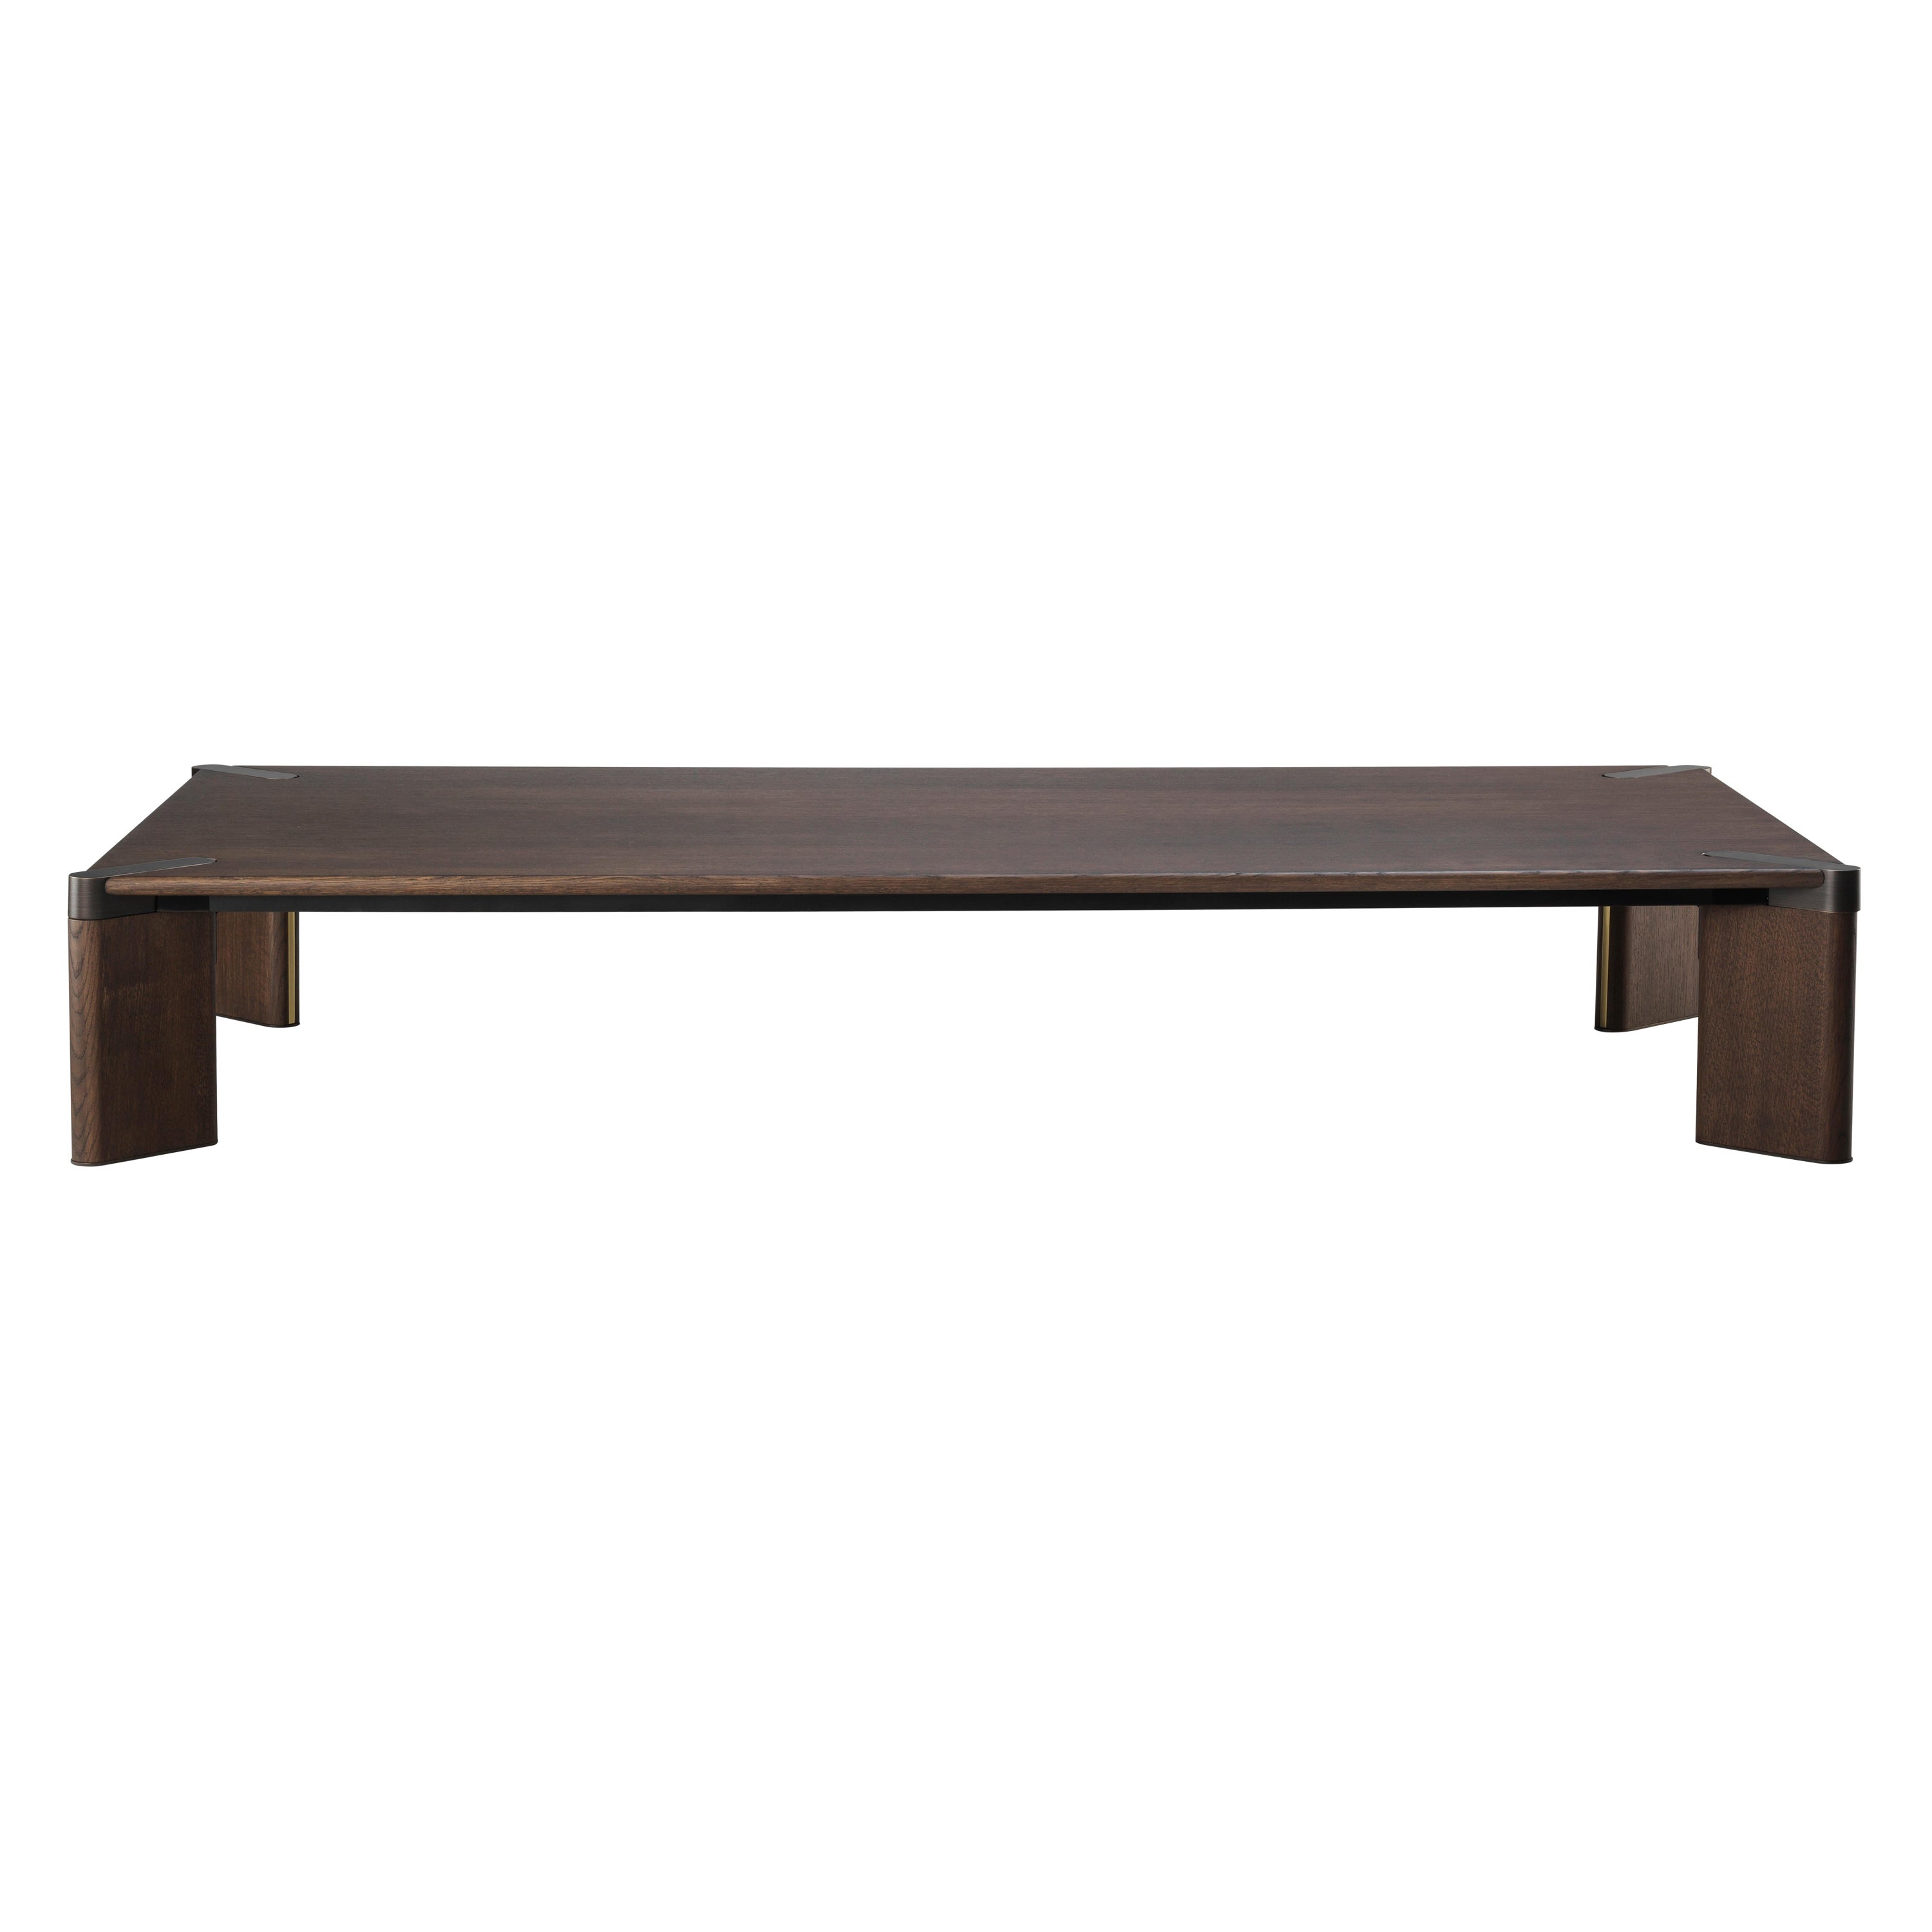 Ottanta Coffee Table, Wood and Burnished Brass Metal Parts, Made in Italy